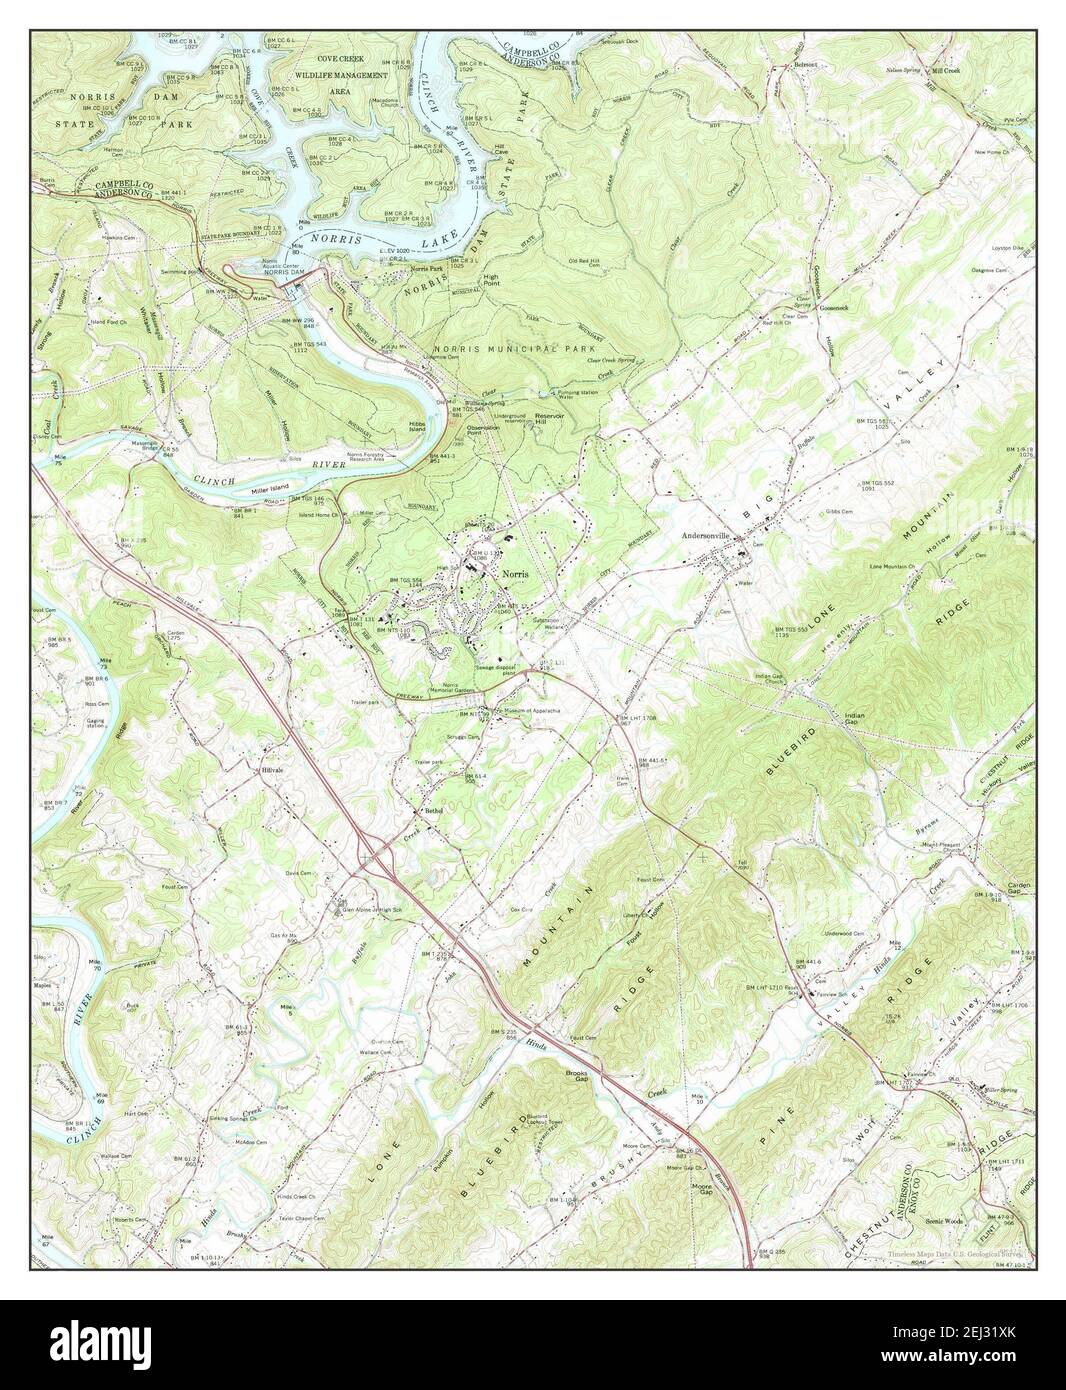 Norris, Tennessee, map 1973, 1:24000, United States of America by Timeless Maps, data U.S. Geological Survey Stock Photo